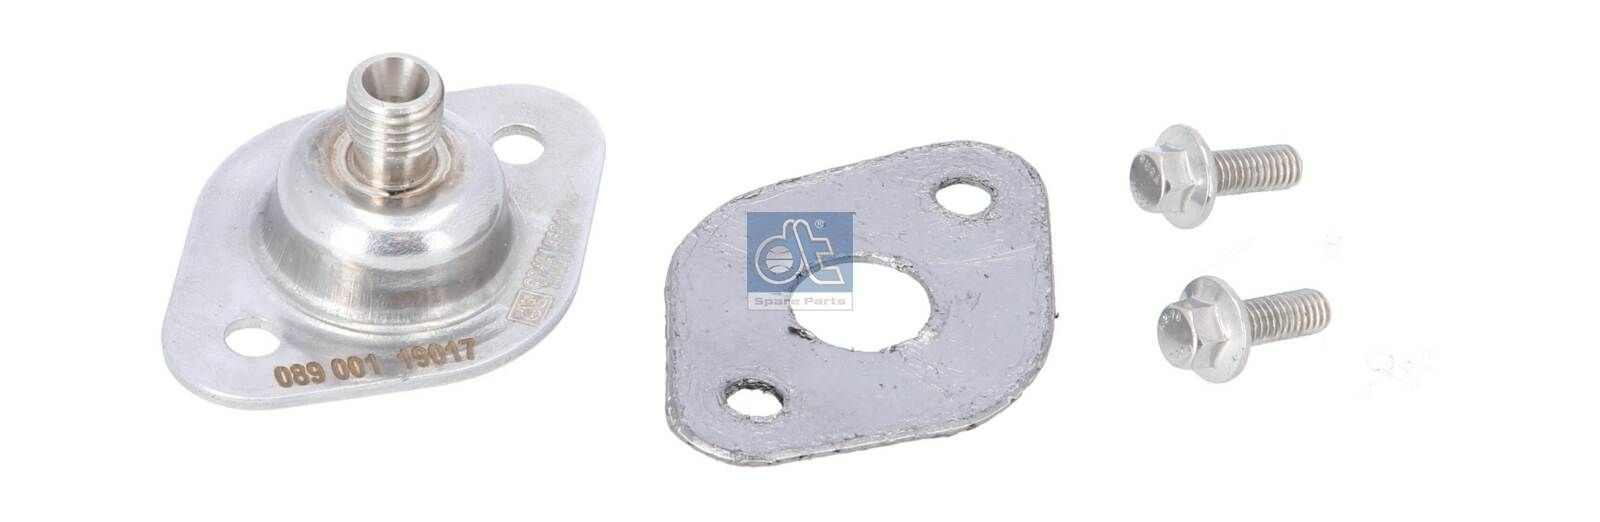 Hyundai Change-Over Valve, exhaust-gas door DT Spare Parts 2.14924 at a good price